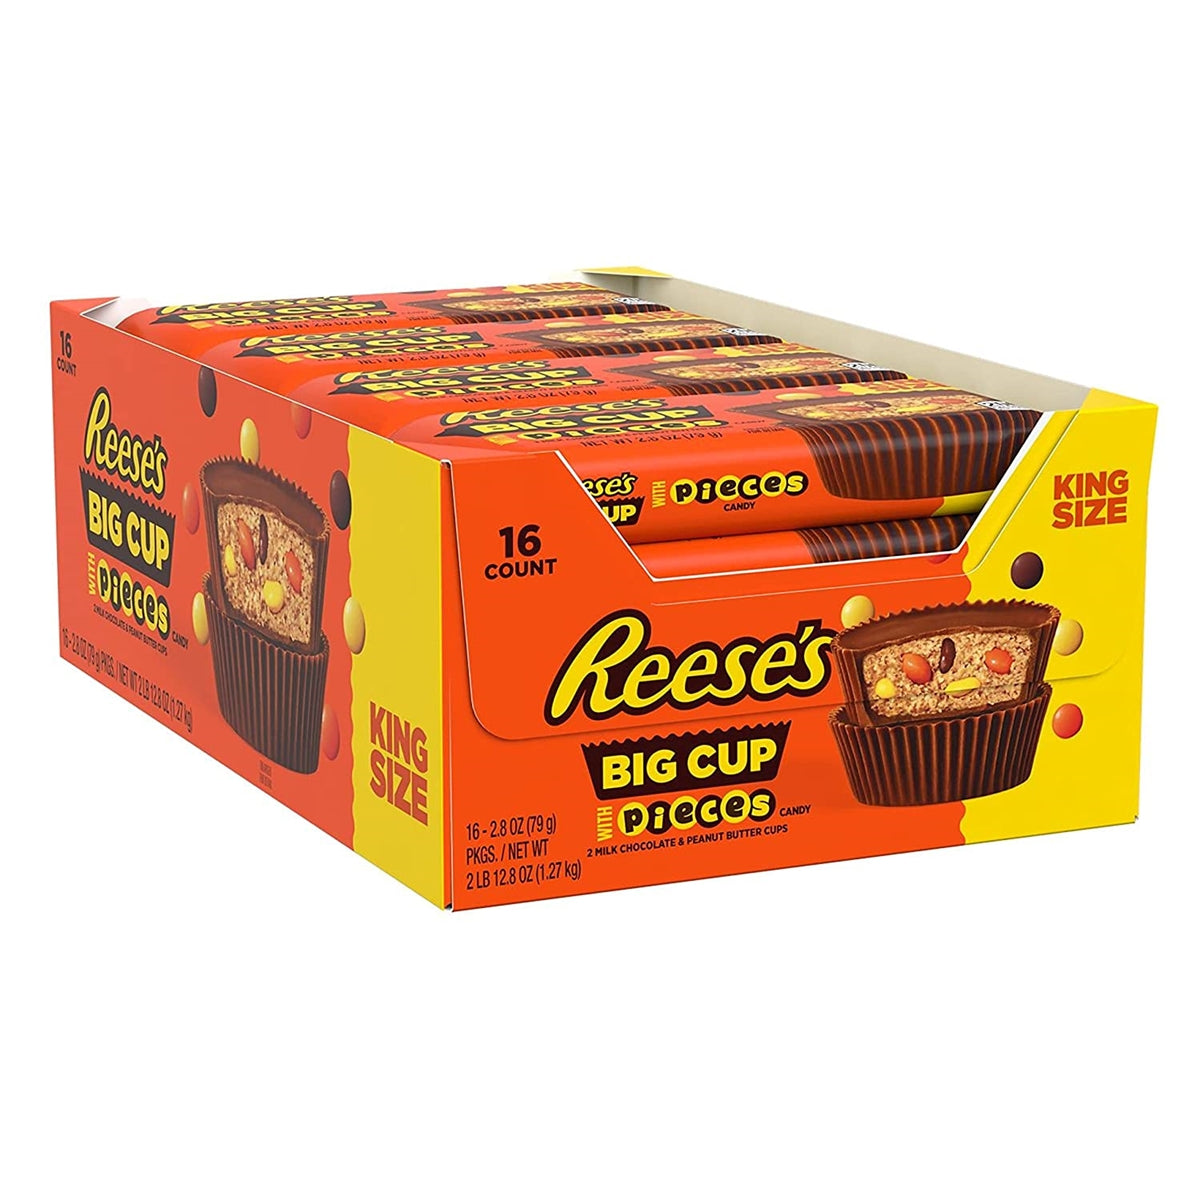 Reese's Big Cup with Pieces King size - 16/box